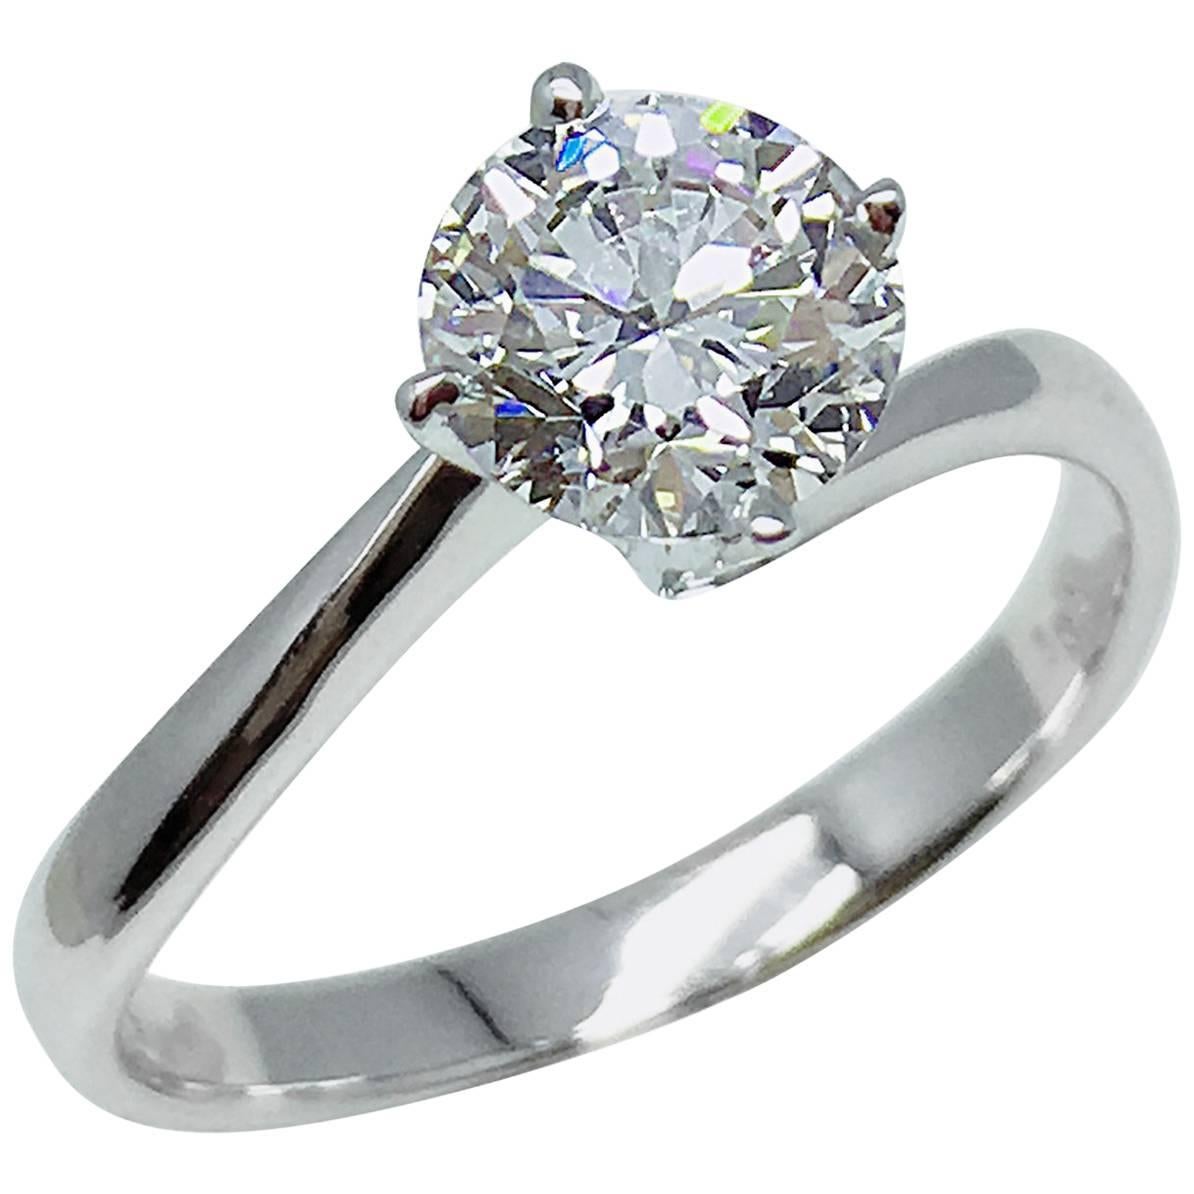 GILIN GIA Certified 1.01 Carat Round Brilliant Diamond Solitaire Engagement Ring